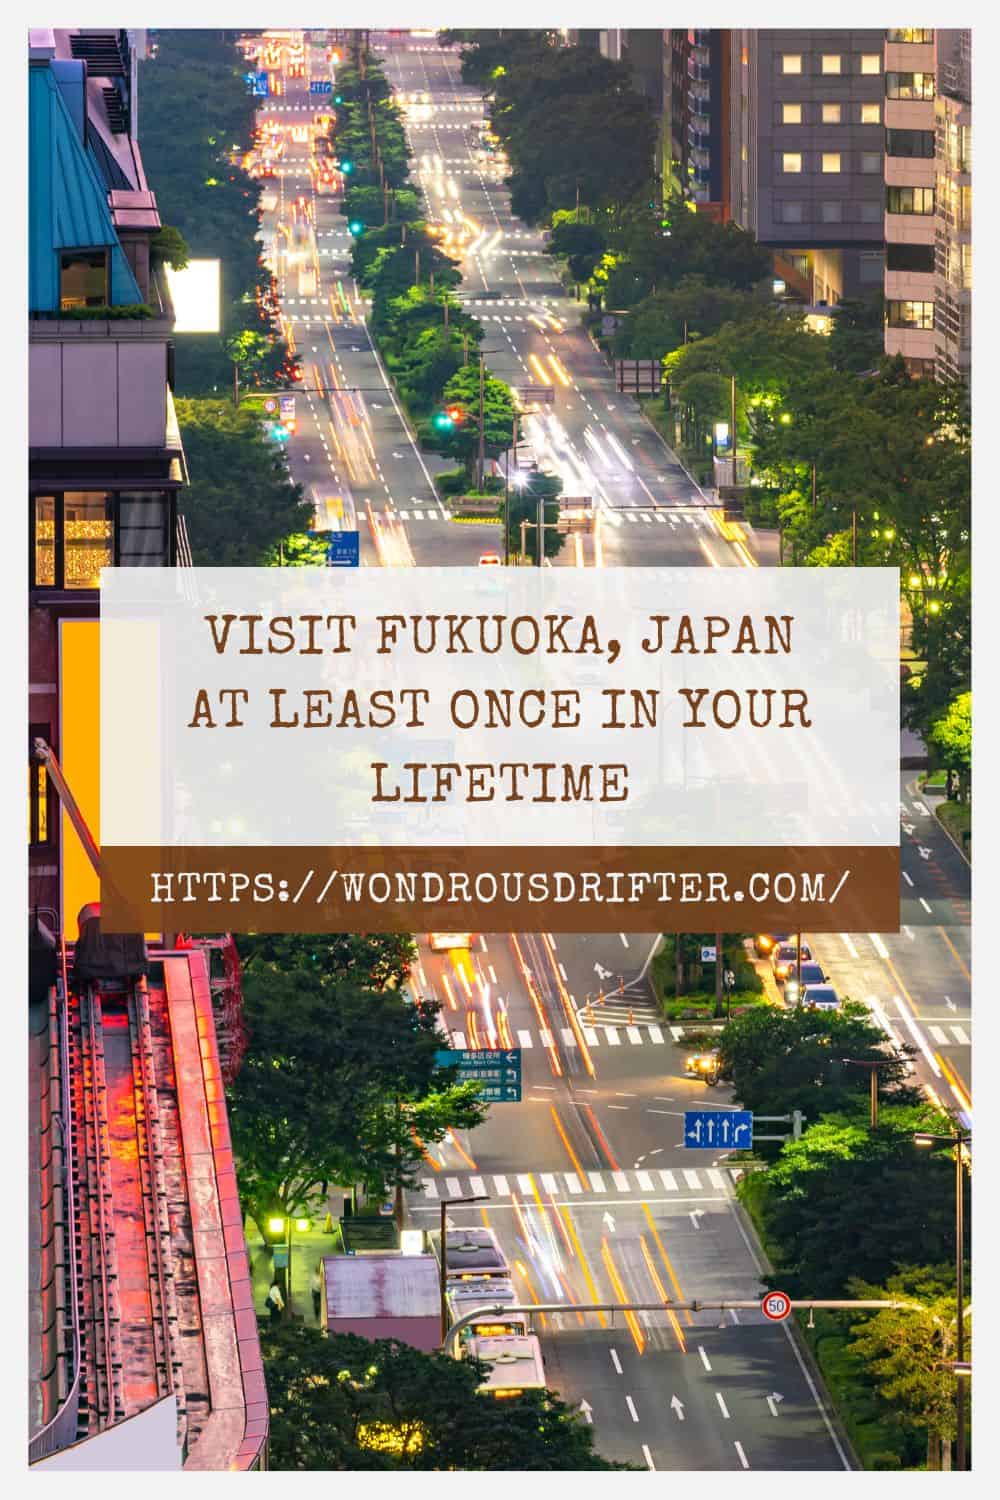 Visit Fukuoka Japan at least once in your lifetime